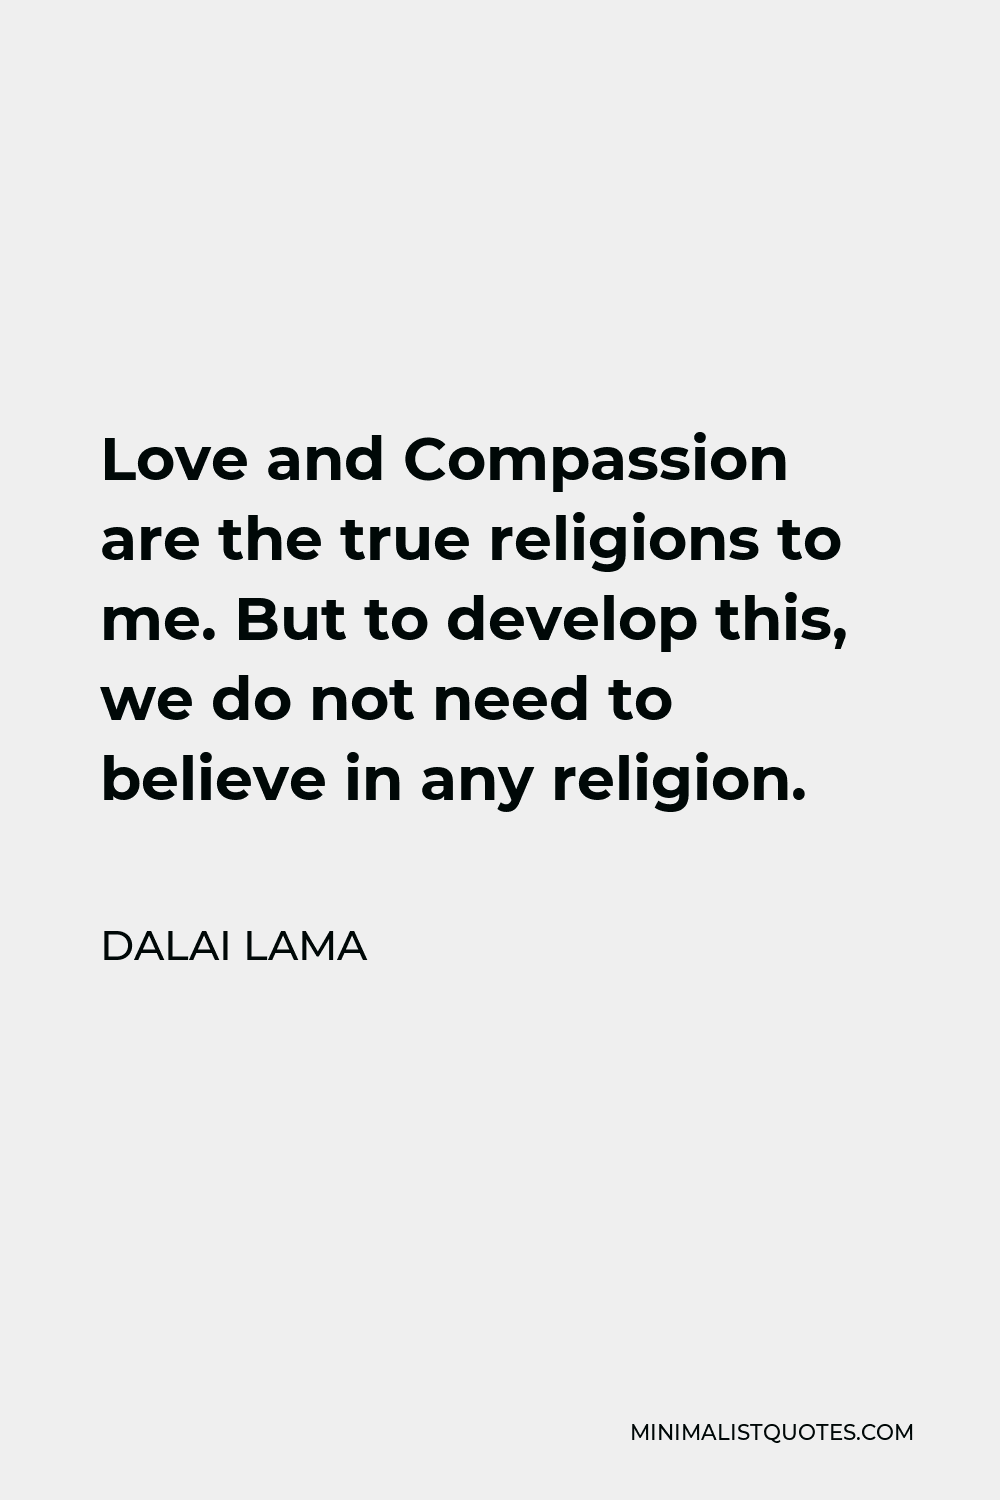 Dalai Lama Quote - Love and Compassion are the true religions to me. But to develop this, we do not need to believe in any religion.